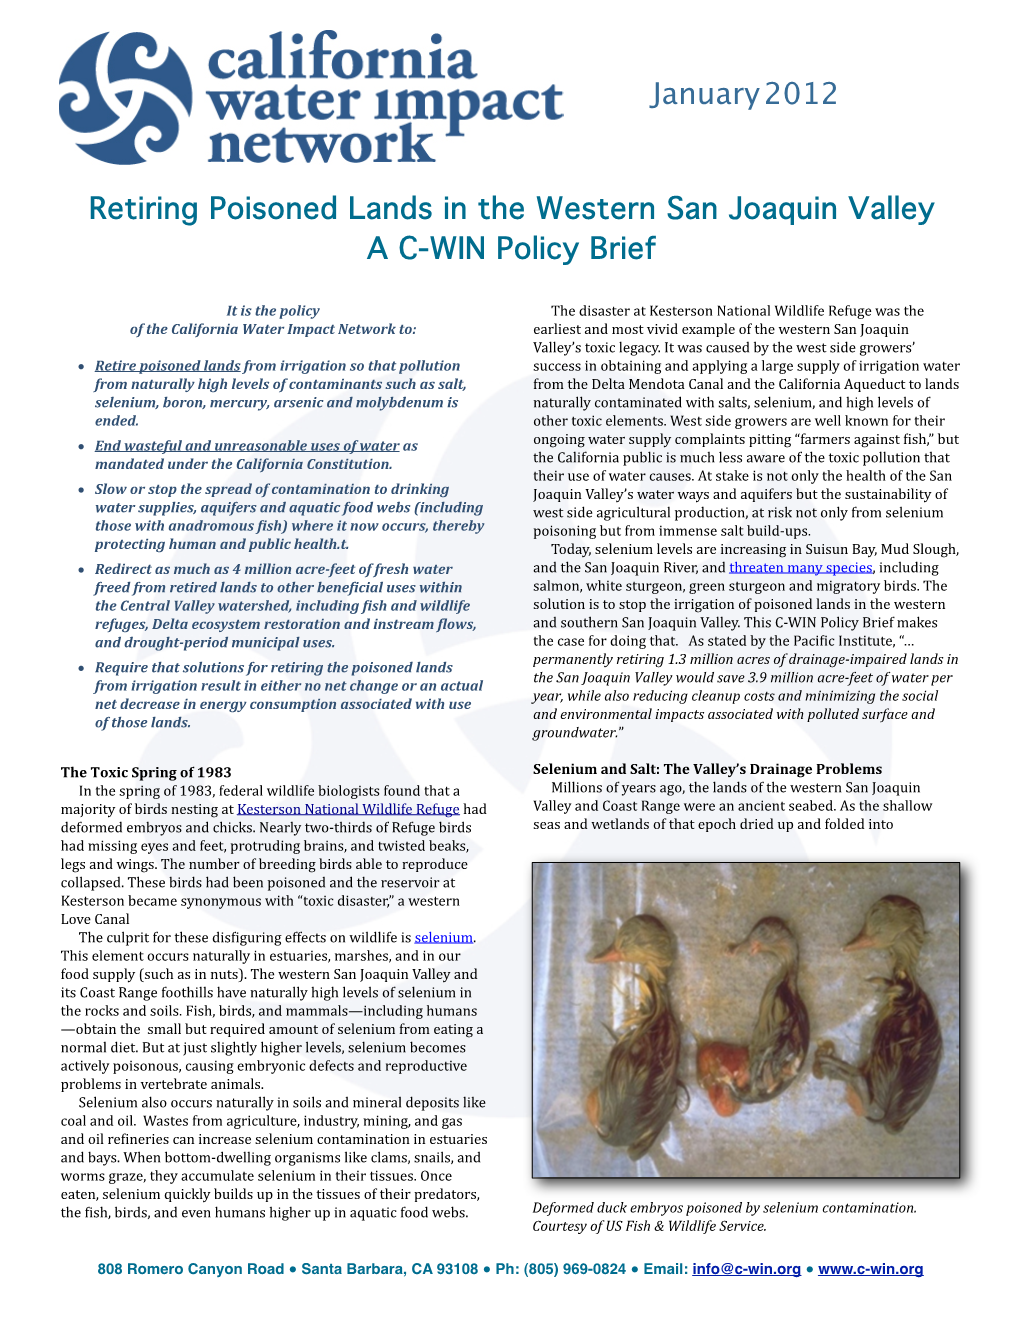 Retiring Poisoned Lands in the Western San Joaquin Valley a C-WIN Policy Brief